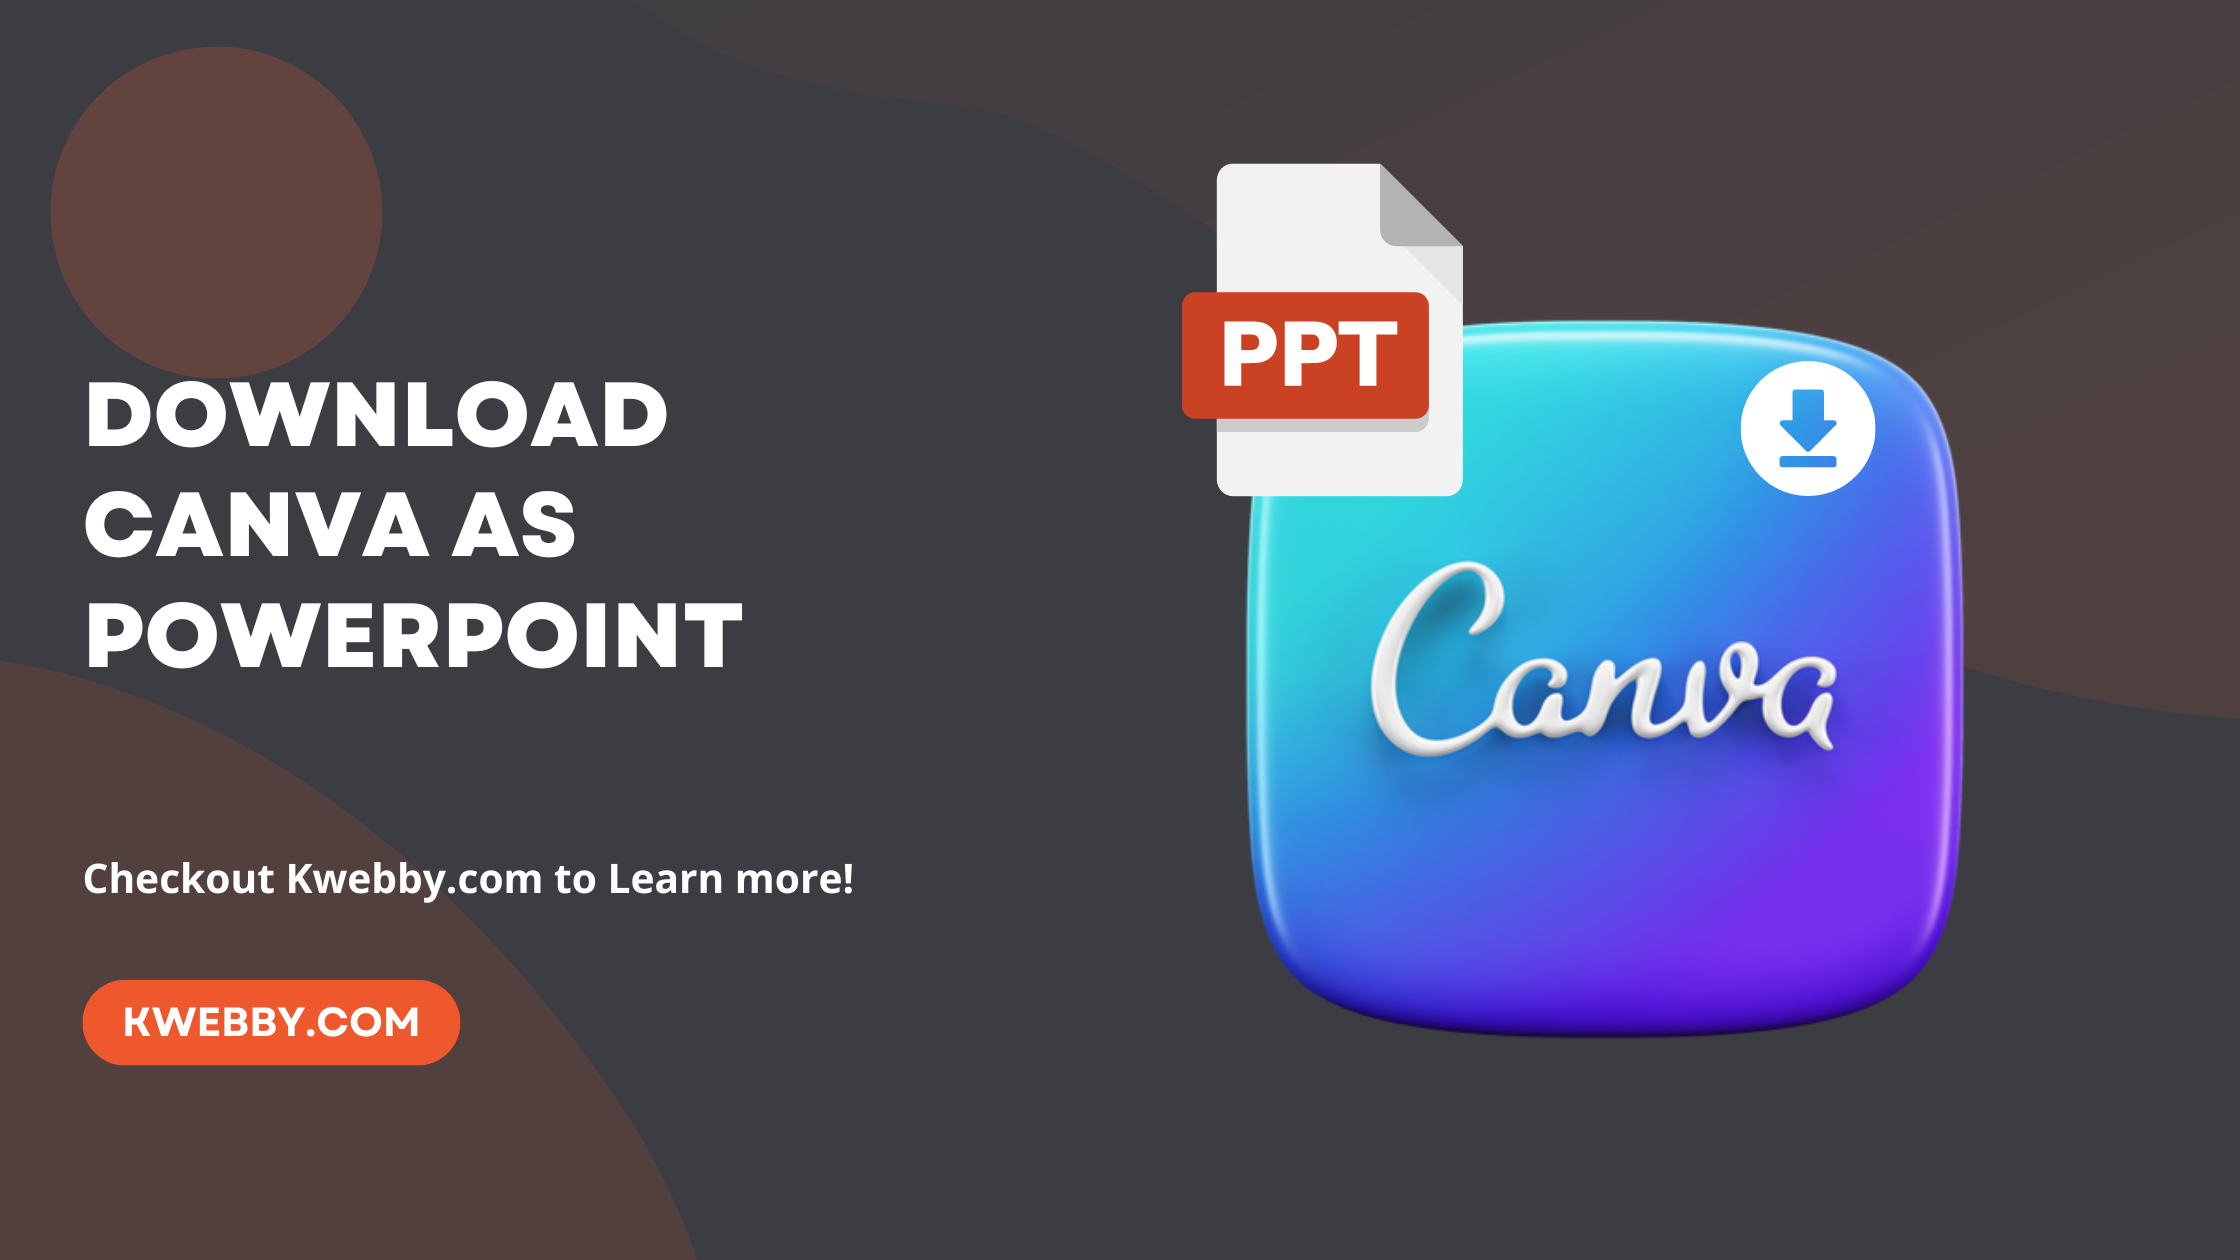 How to download Canva as PowerPoint (PPT) file in 2 Clicks